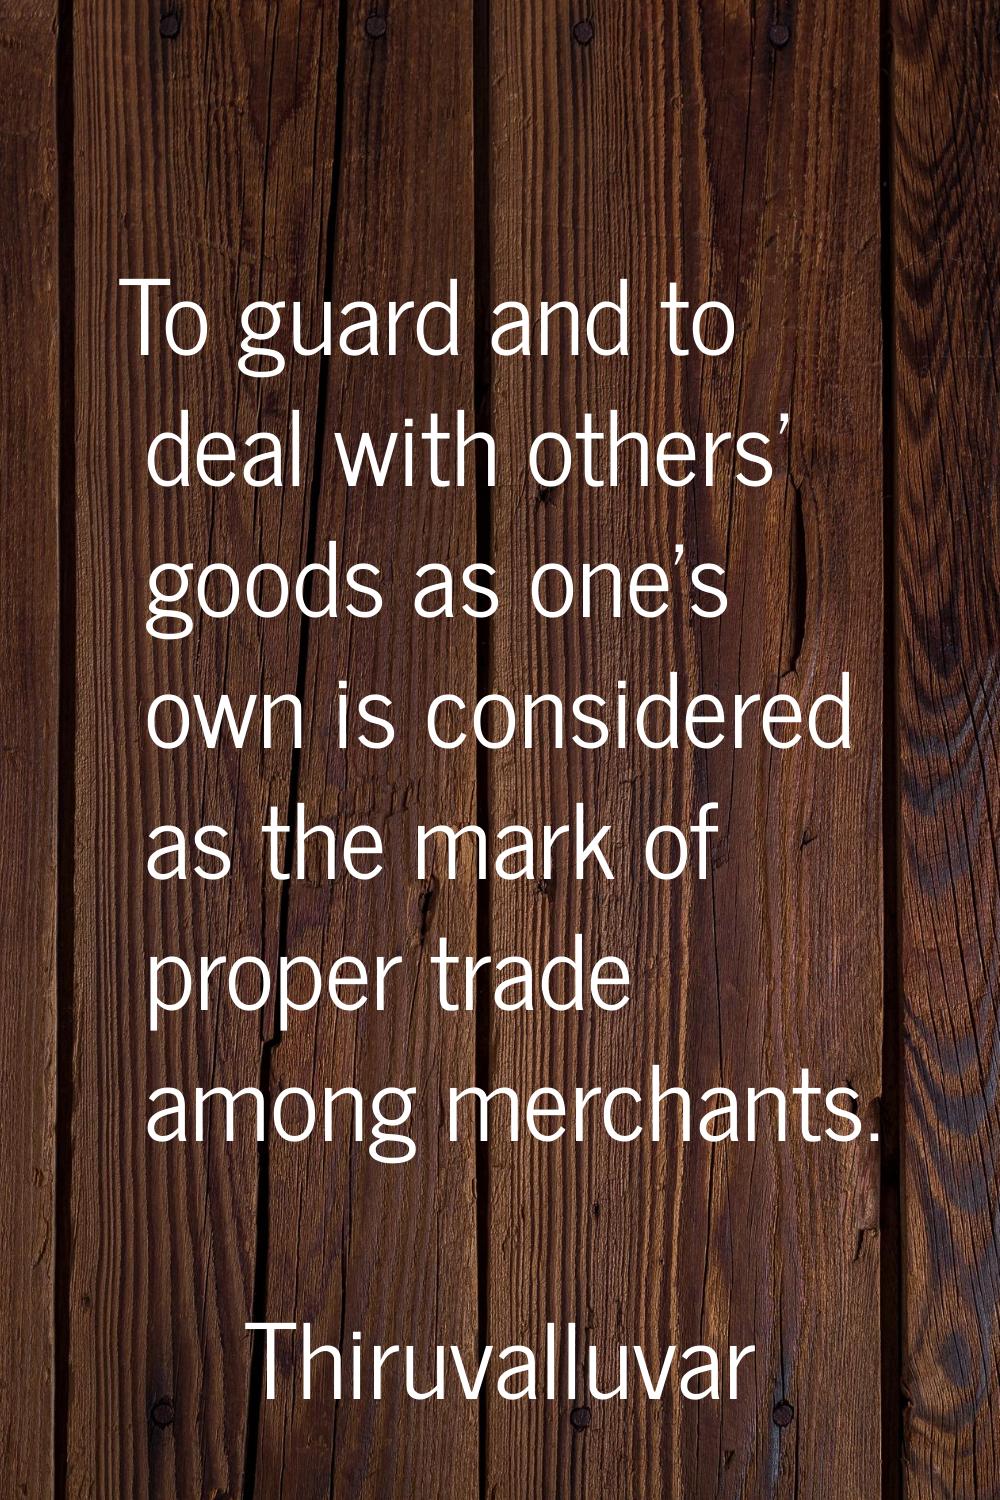 To guard and to deal with others' goods as one's own is considered as the mark of proper trade amon